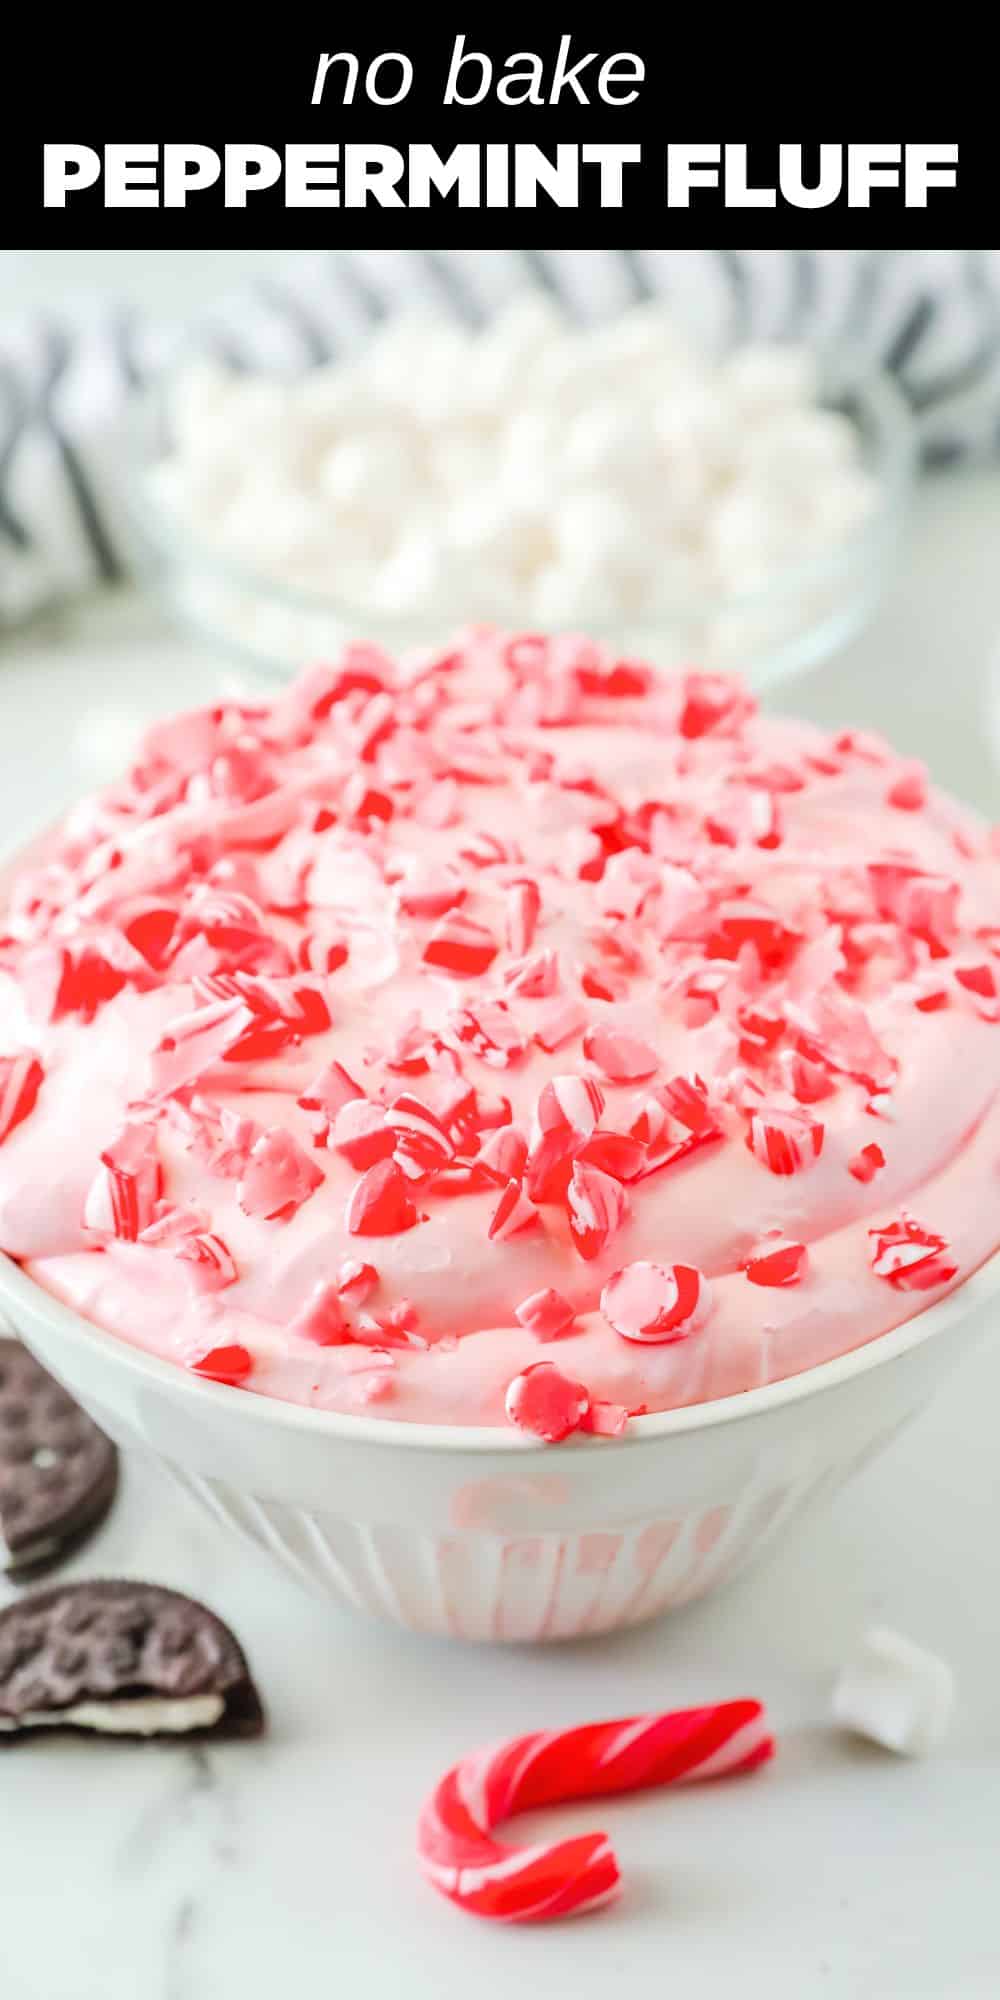 This peppermint candy cane fluff is a delicious and festive treat that’s perfect for celebrating the holidays. This rich and creamy dessert dip is sure to be the star of your Christmas party.